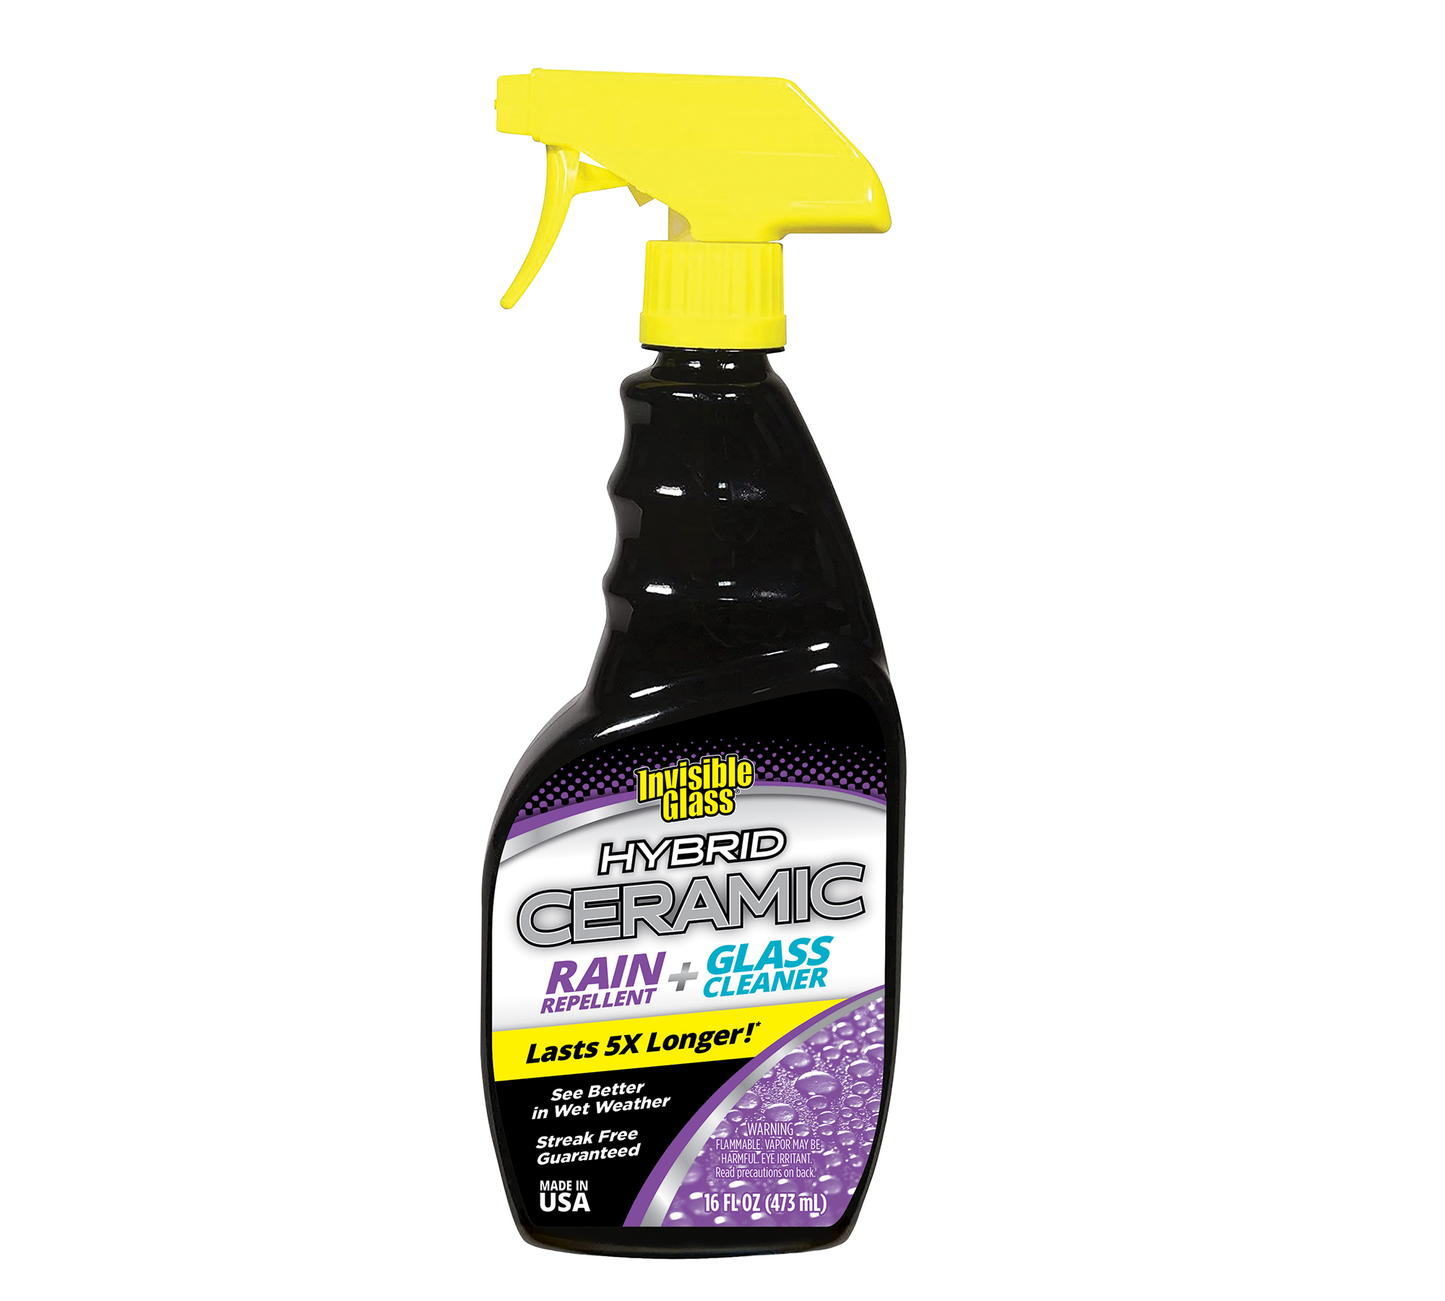 Meguiar's on Instagram: ⚡ NEW PRODUCT ⚡ - Ultimate Glass Cleaner & Water  Repellent!! Clean exterior glass and leave behind a layer of protection  that delivers a hydrophobic finish that repels water